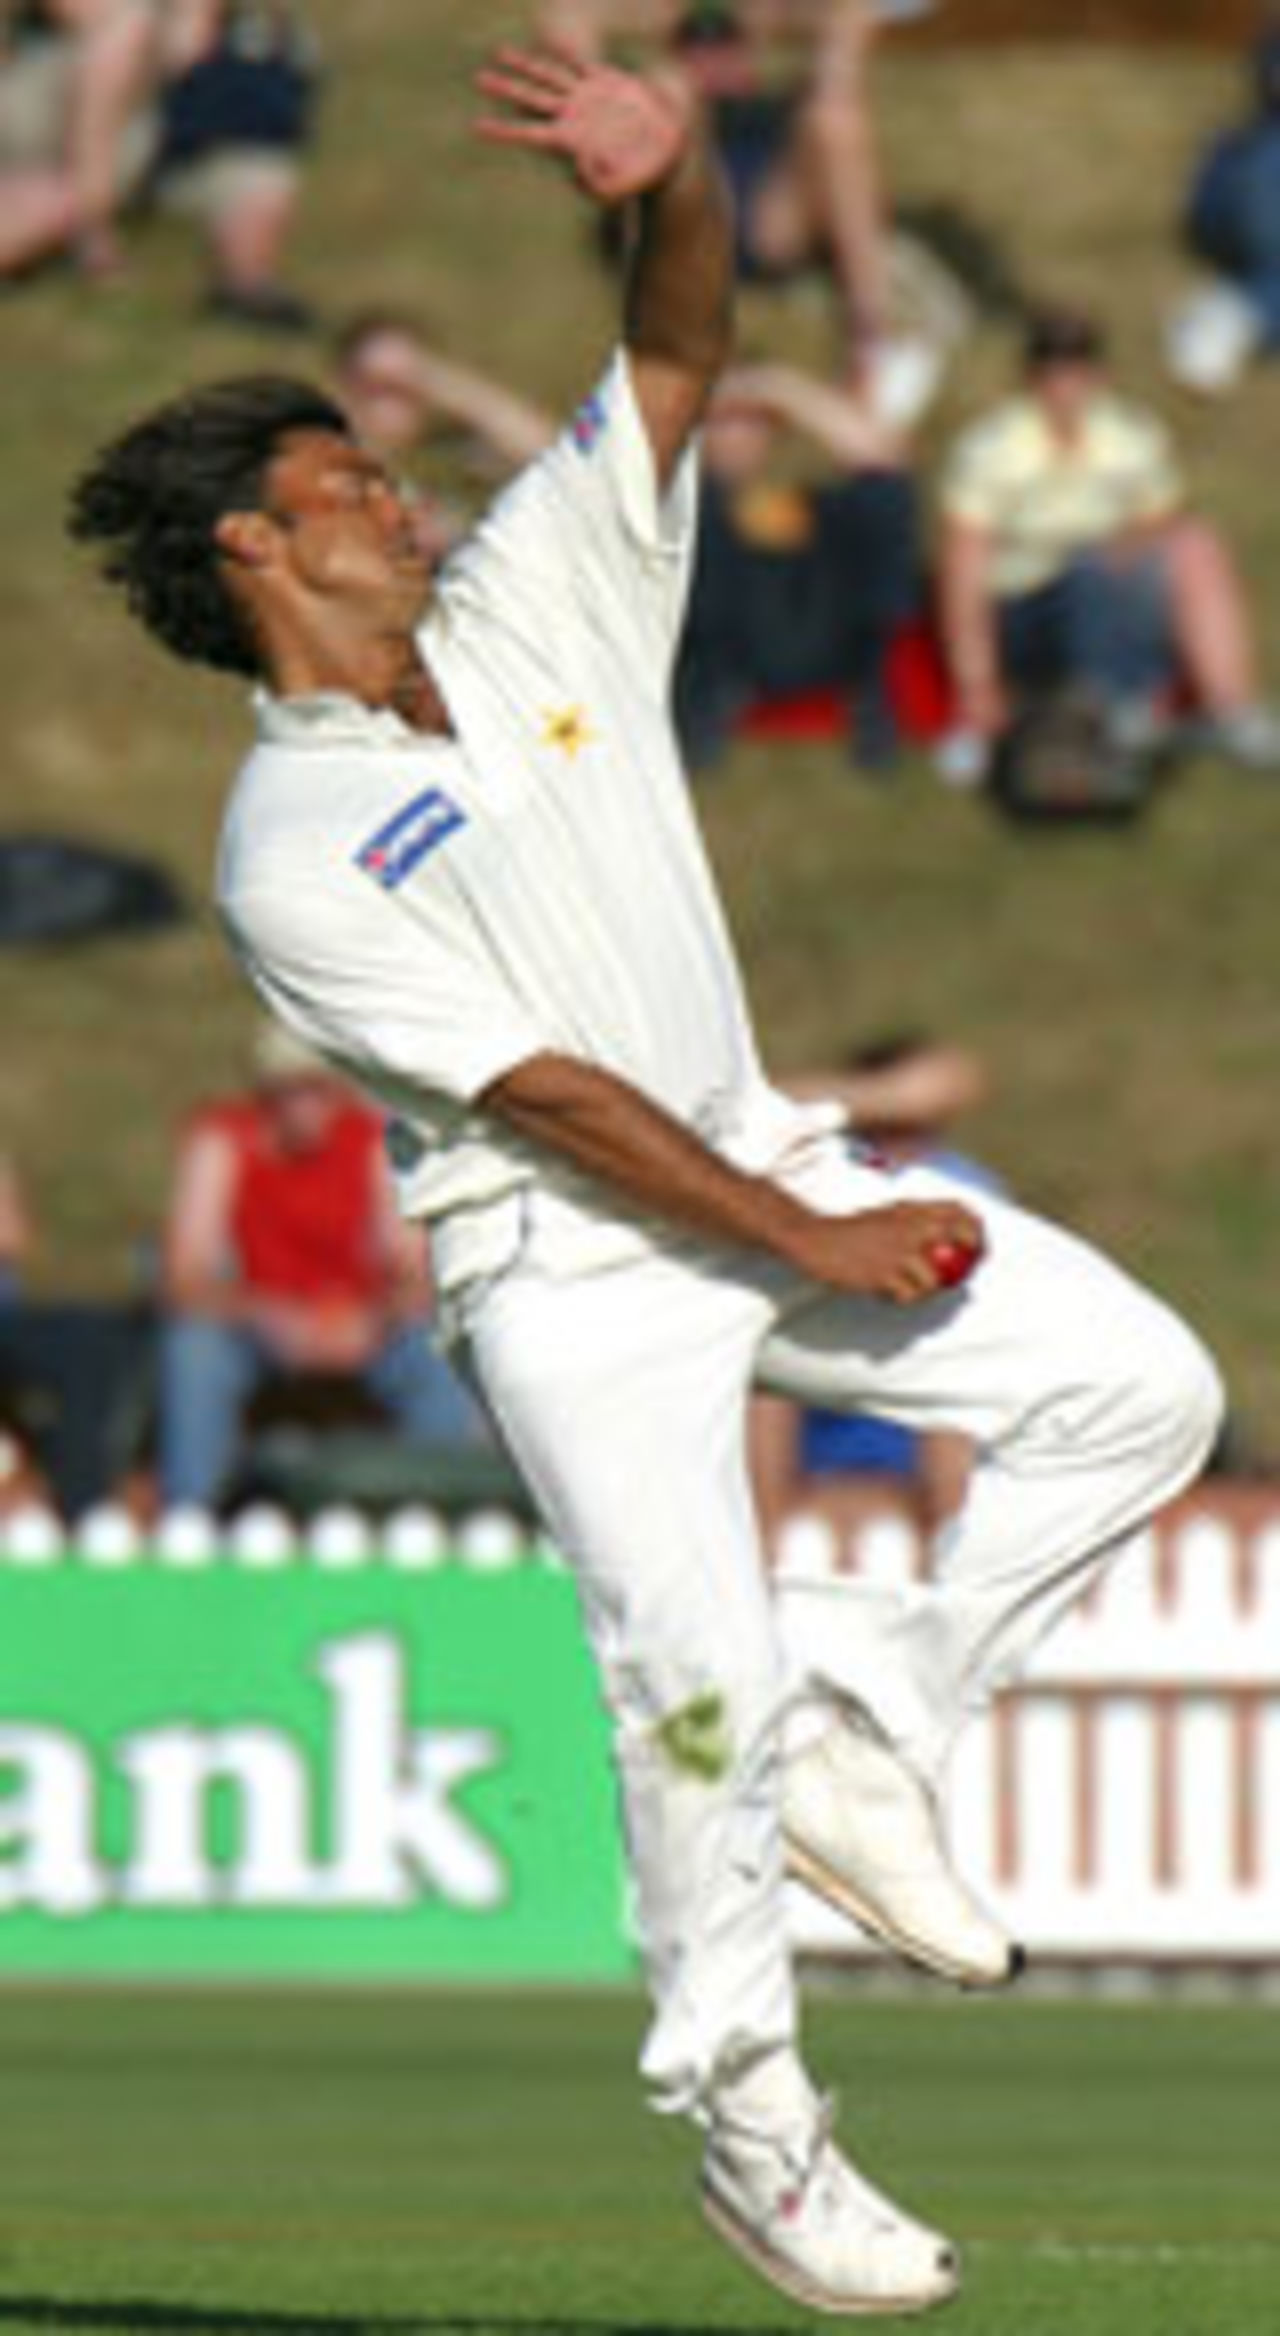 Shoaib Akhtar about to deliver a ball, New Zealand v Pakistan, 2nd Test, Wellington, 2nd day, December 27, 2003